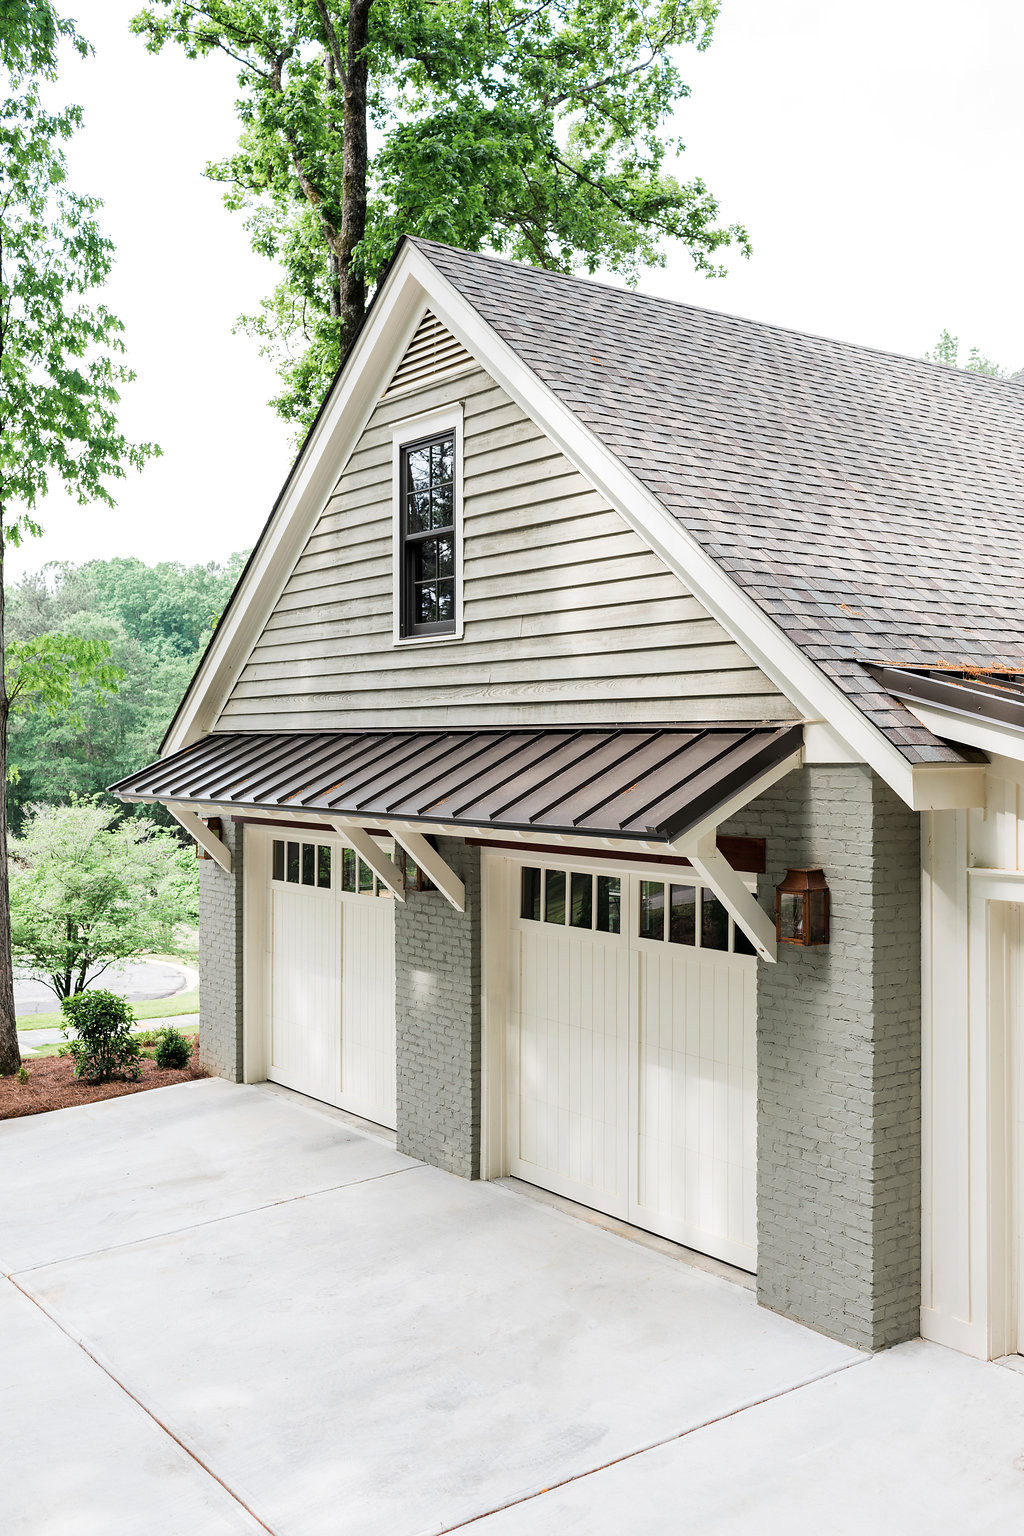 75 Beautiful Detached Two Car Garage Pictures Ideas February 2021 Houzz